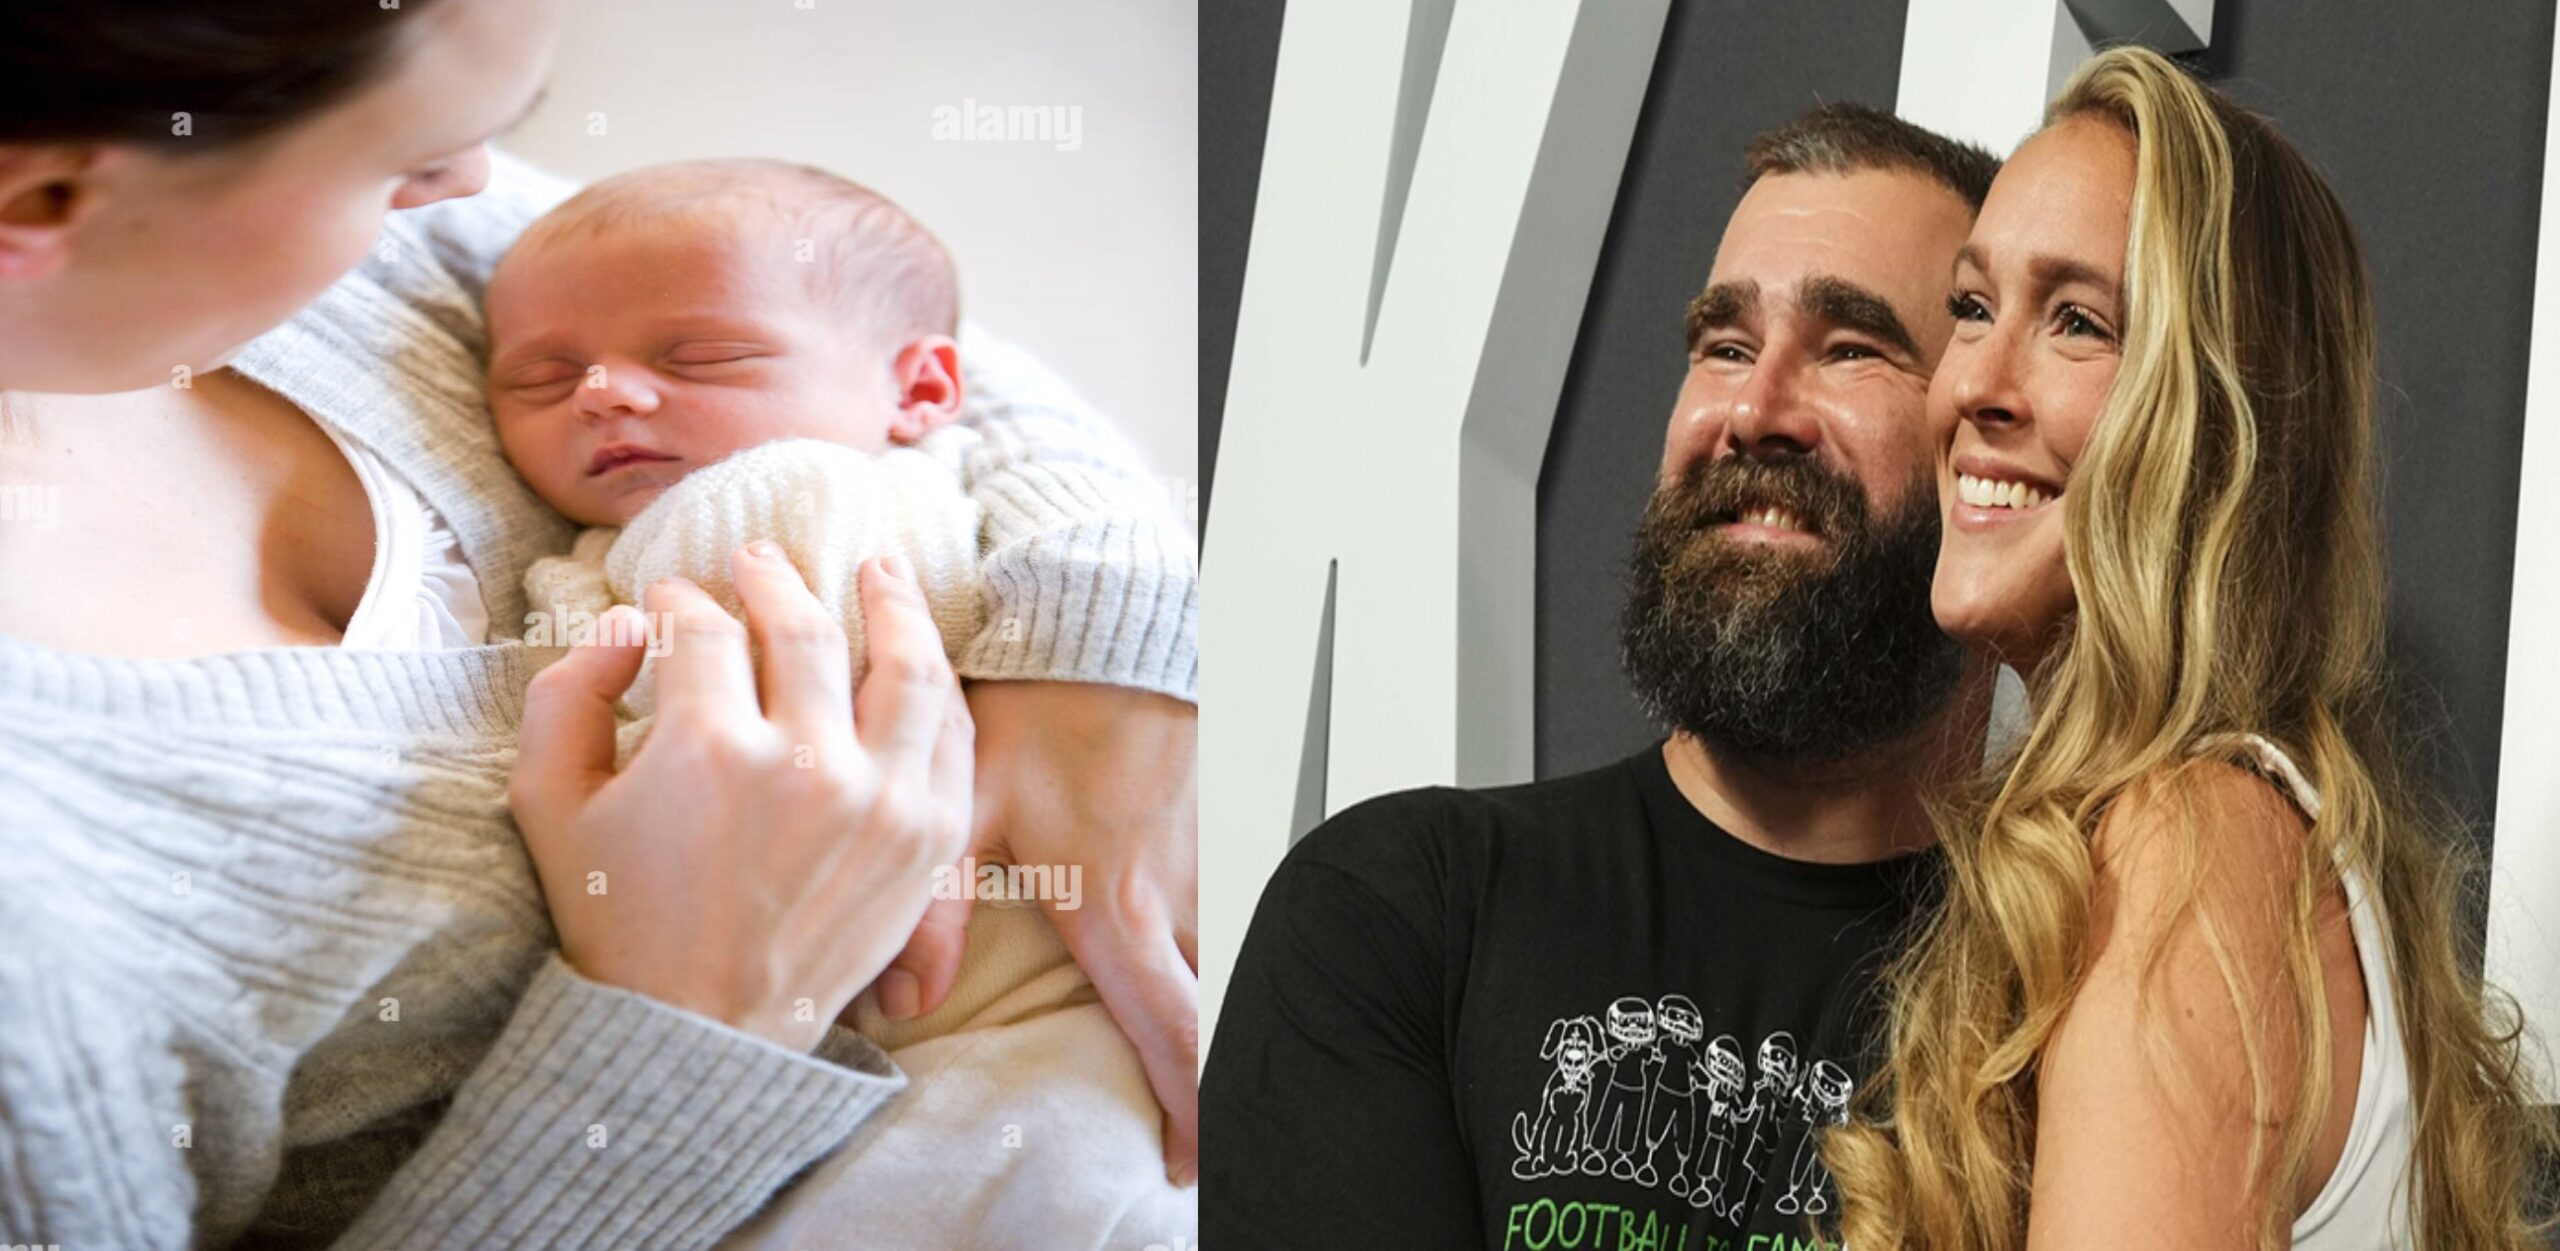 NFL legend Jason Kelce and his wife Kylie McDevitt joyfully announce the arrival of their fourth child, sharing the delightful news of the baby's gender.